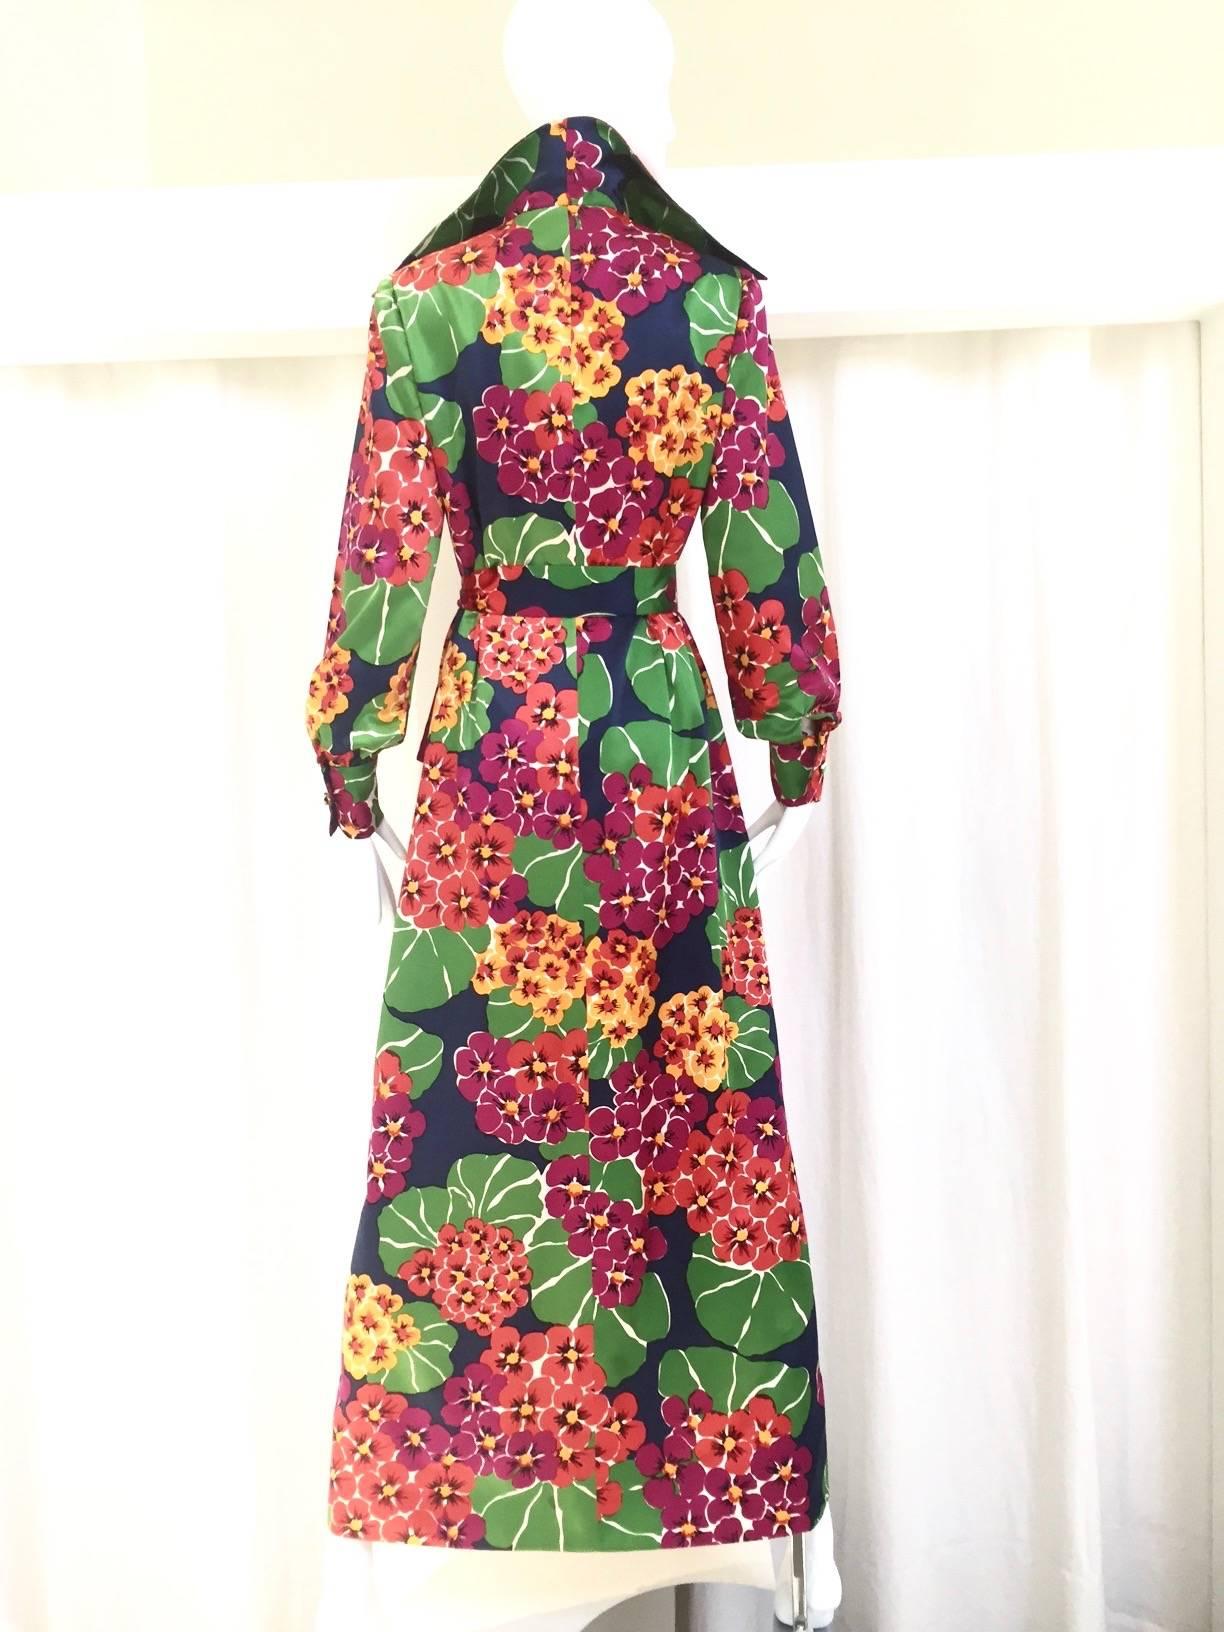 Vintage 1970s Geoffrey Beene hippie floral print silk twill shirt maxi dress in vibrant color in fuschia, purple, blue, green and yellow. Dress is lined in blue silk. 
 size: 6/8 Medium
Bust: 38"/ Waist: 36"/ Hip: 40"/Length: 56"